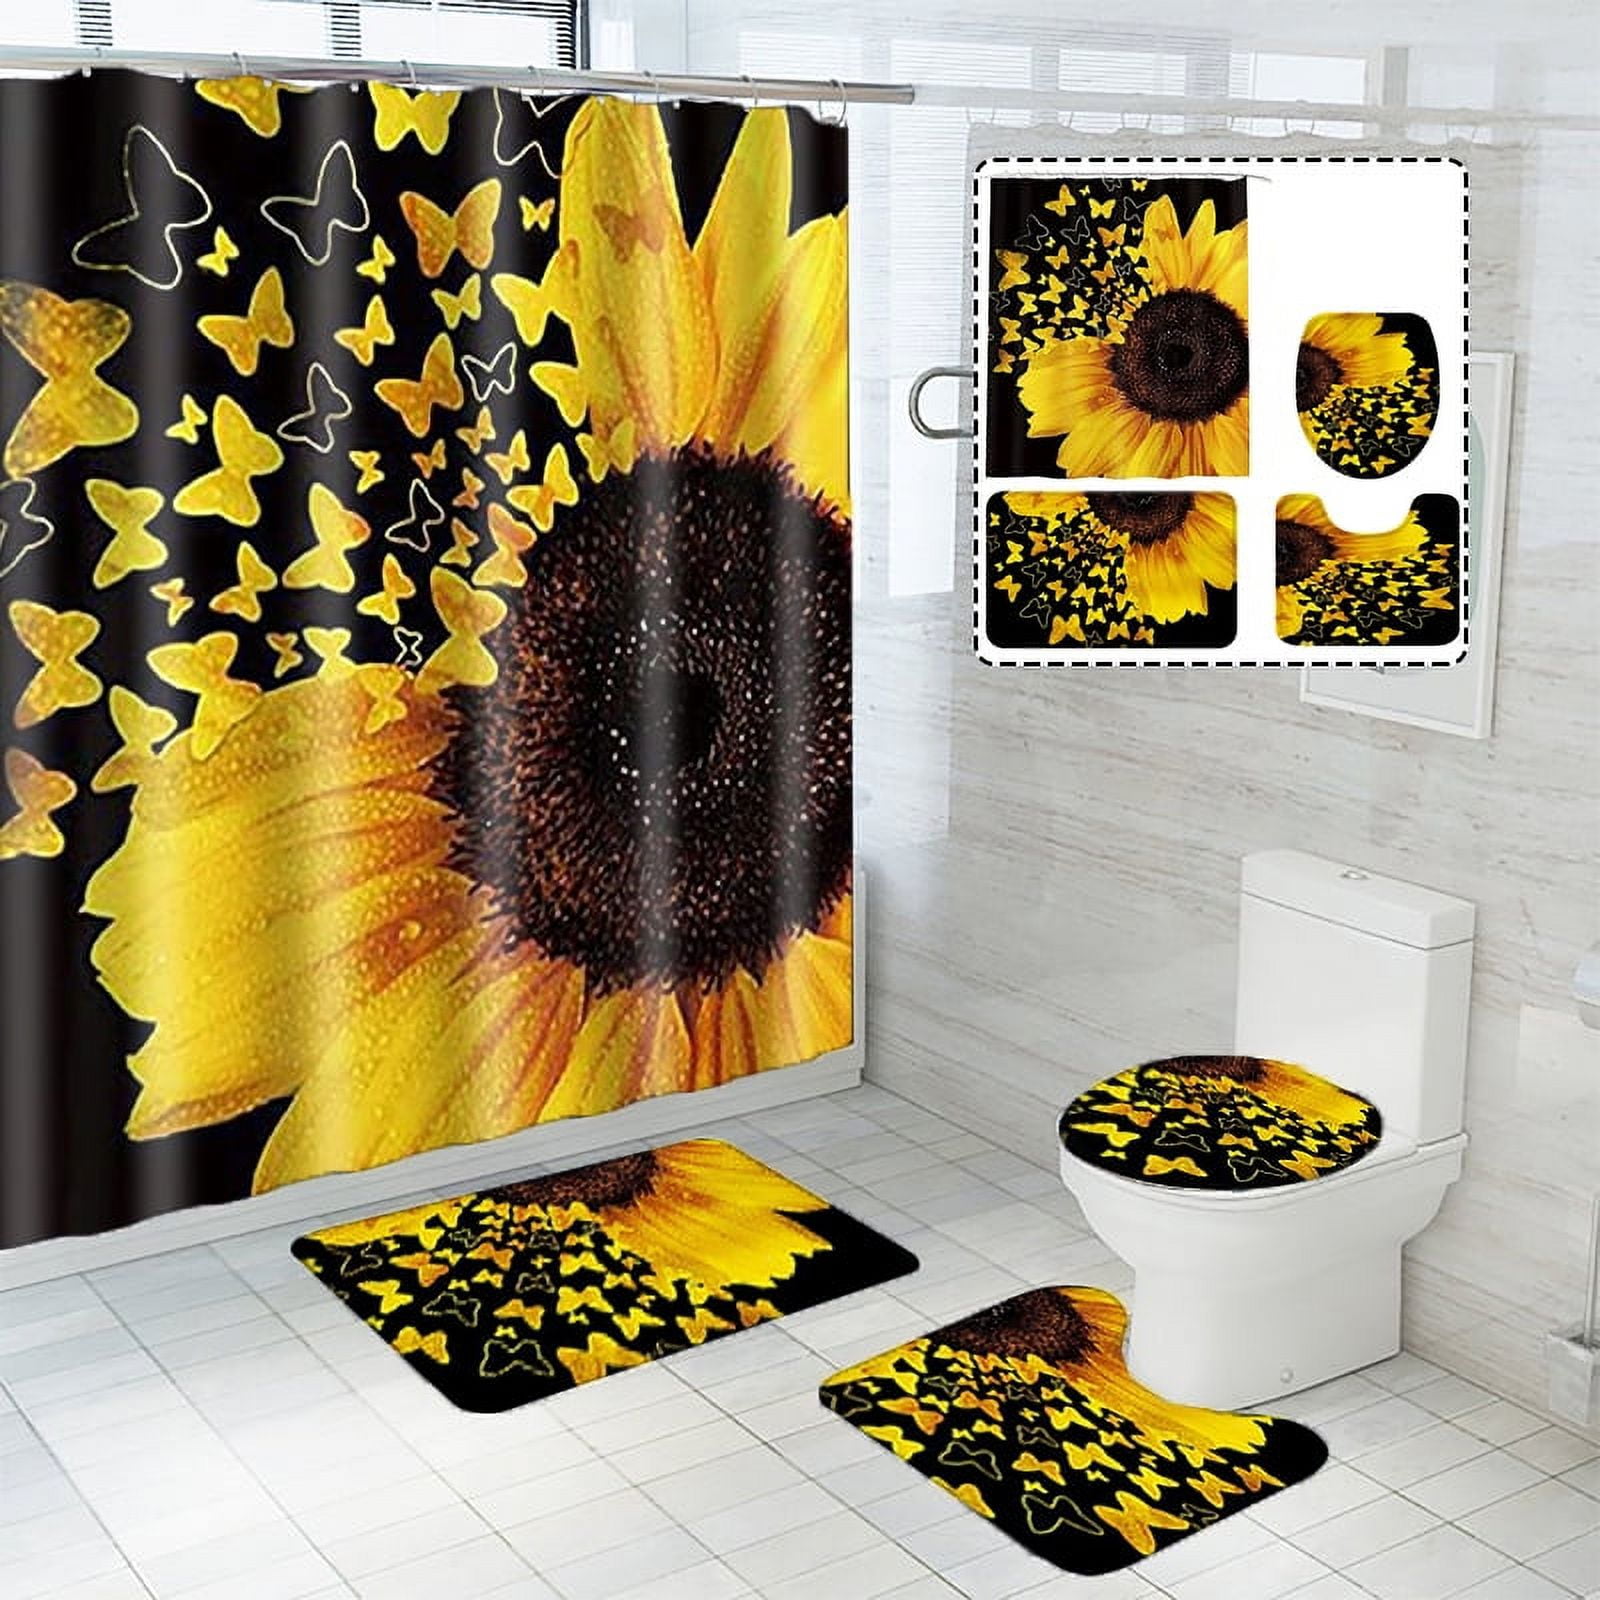 4Pcs Sunflower Shower Curtain and Rug Sets Bathroom Decor, Waterproof  Shower Curtain with Hooks and 3Pcs Toilet Cover Mat Set